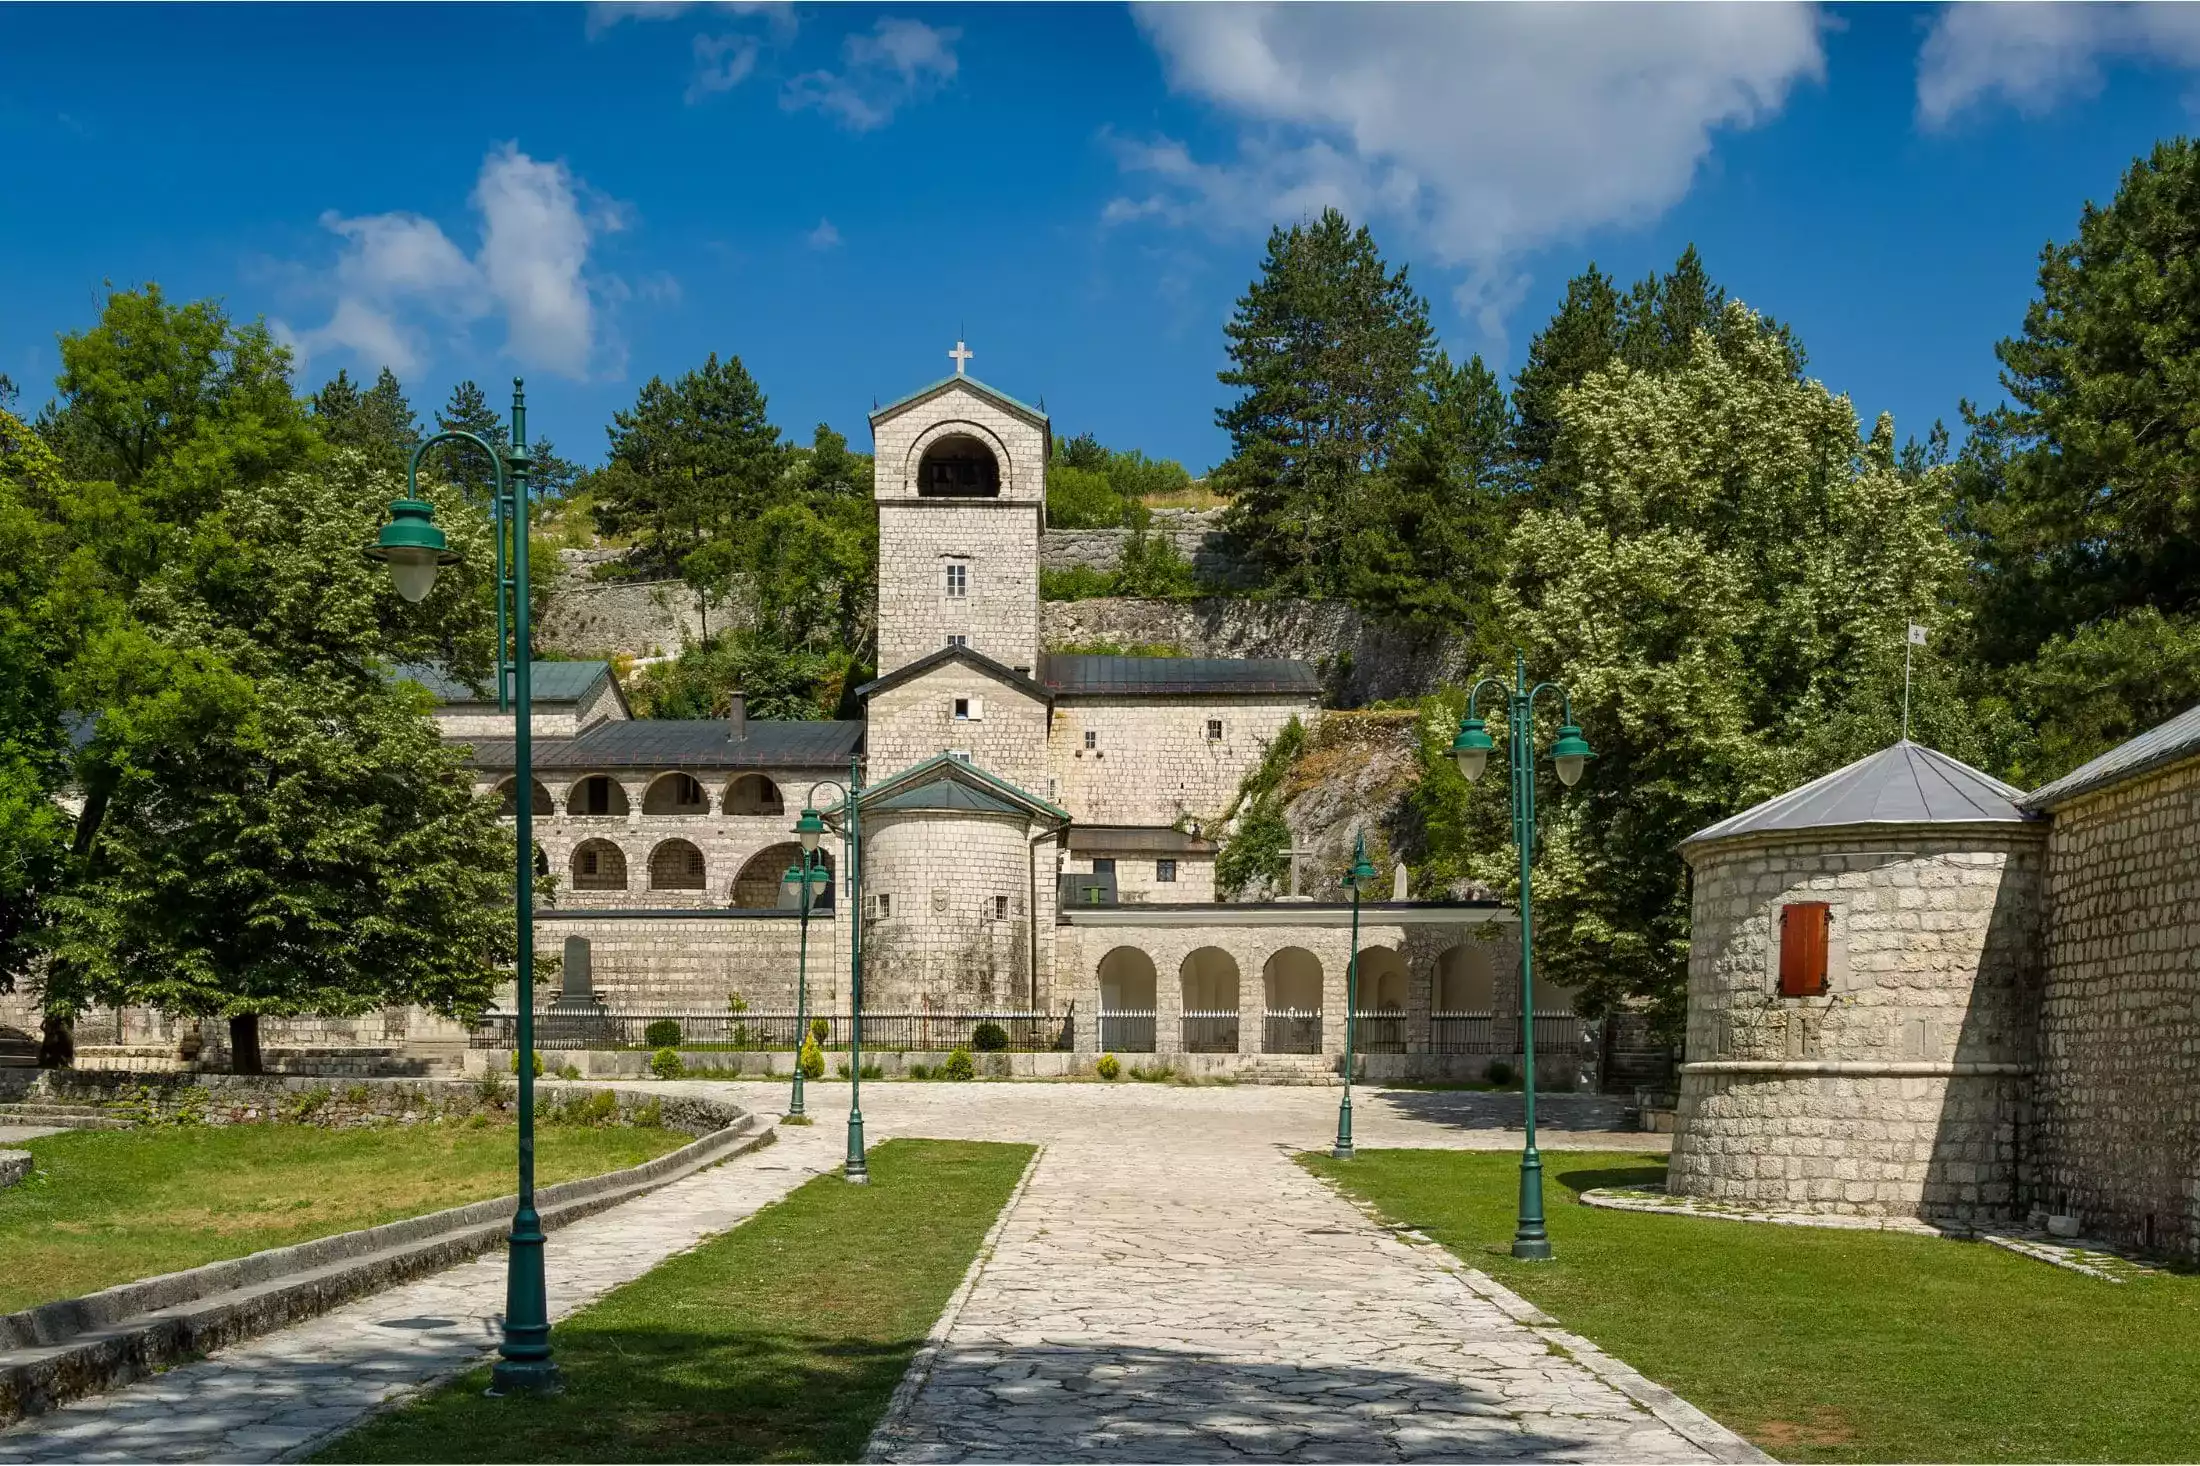 Cetinje Monastery dating back to the 15th century